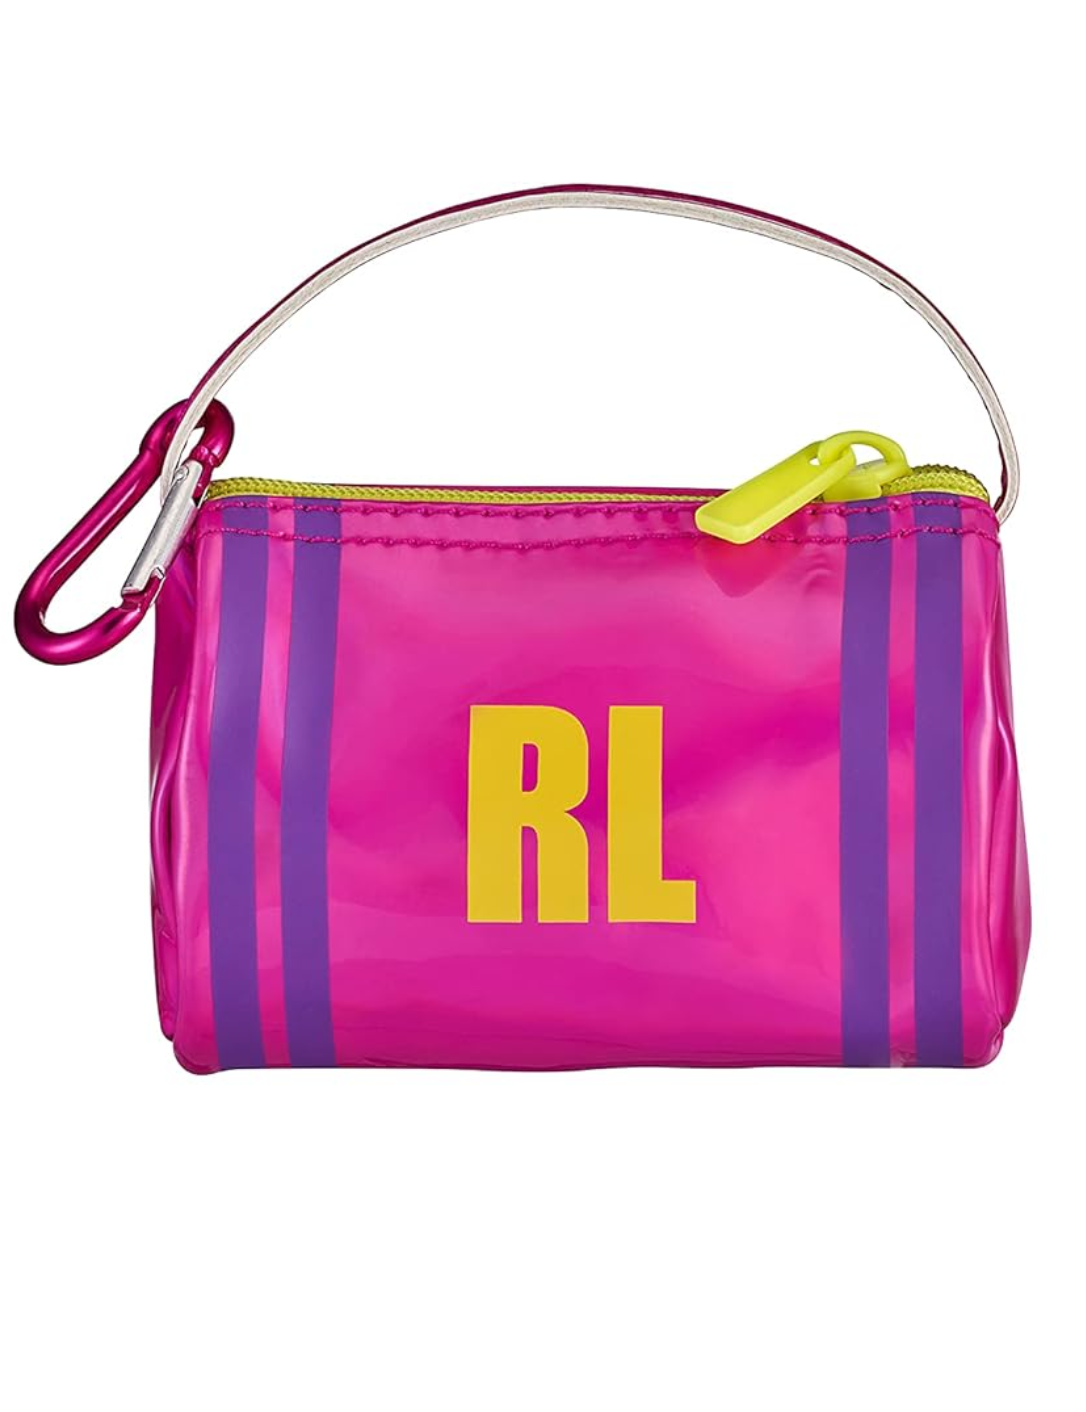 Real Little Miniature Pink Sports Bag